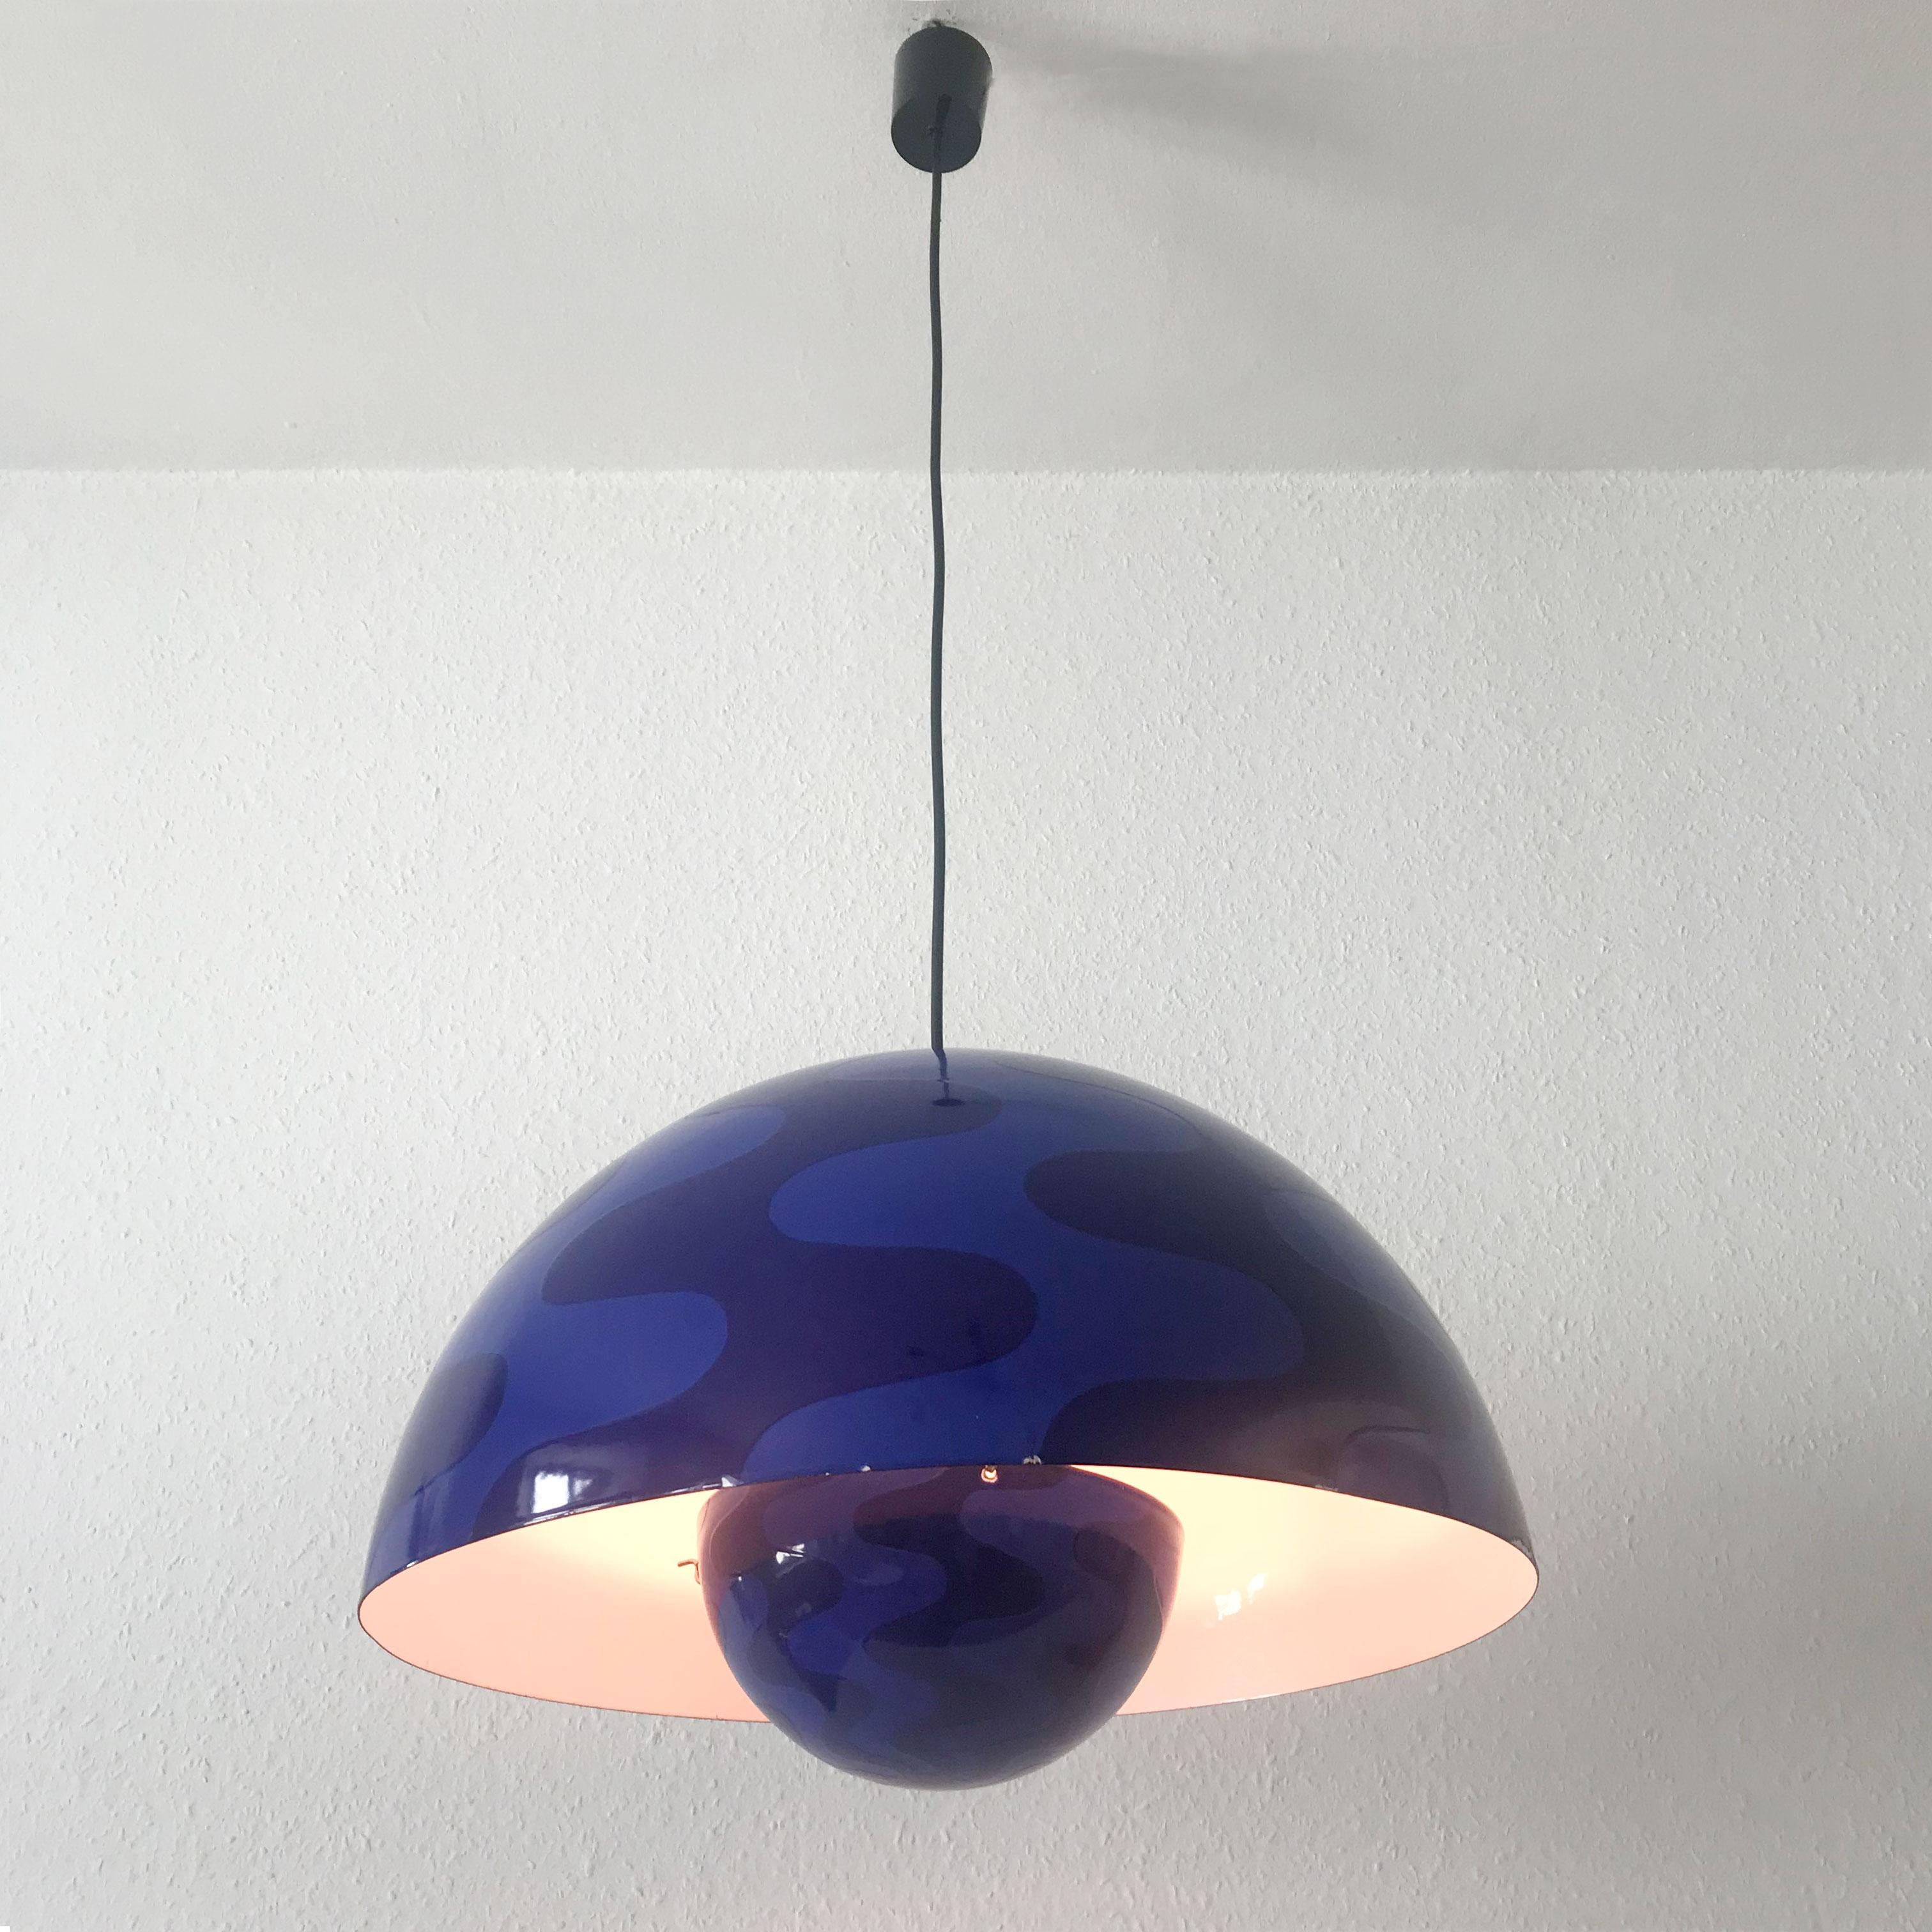 Rare and Large Flower Pot Pendant Lamp by Verner Panton for Louis Poulsen 1971 For Sale 2